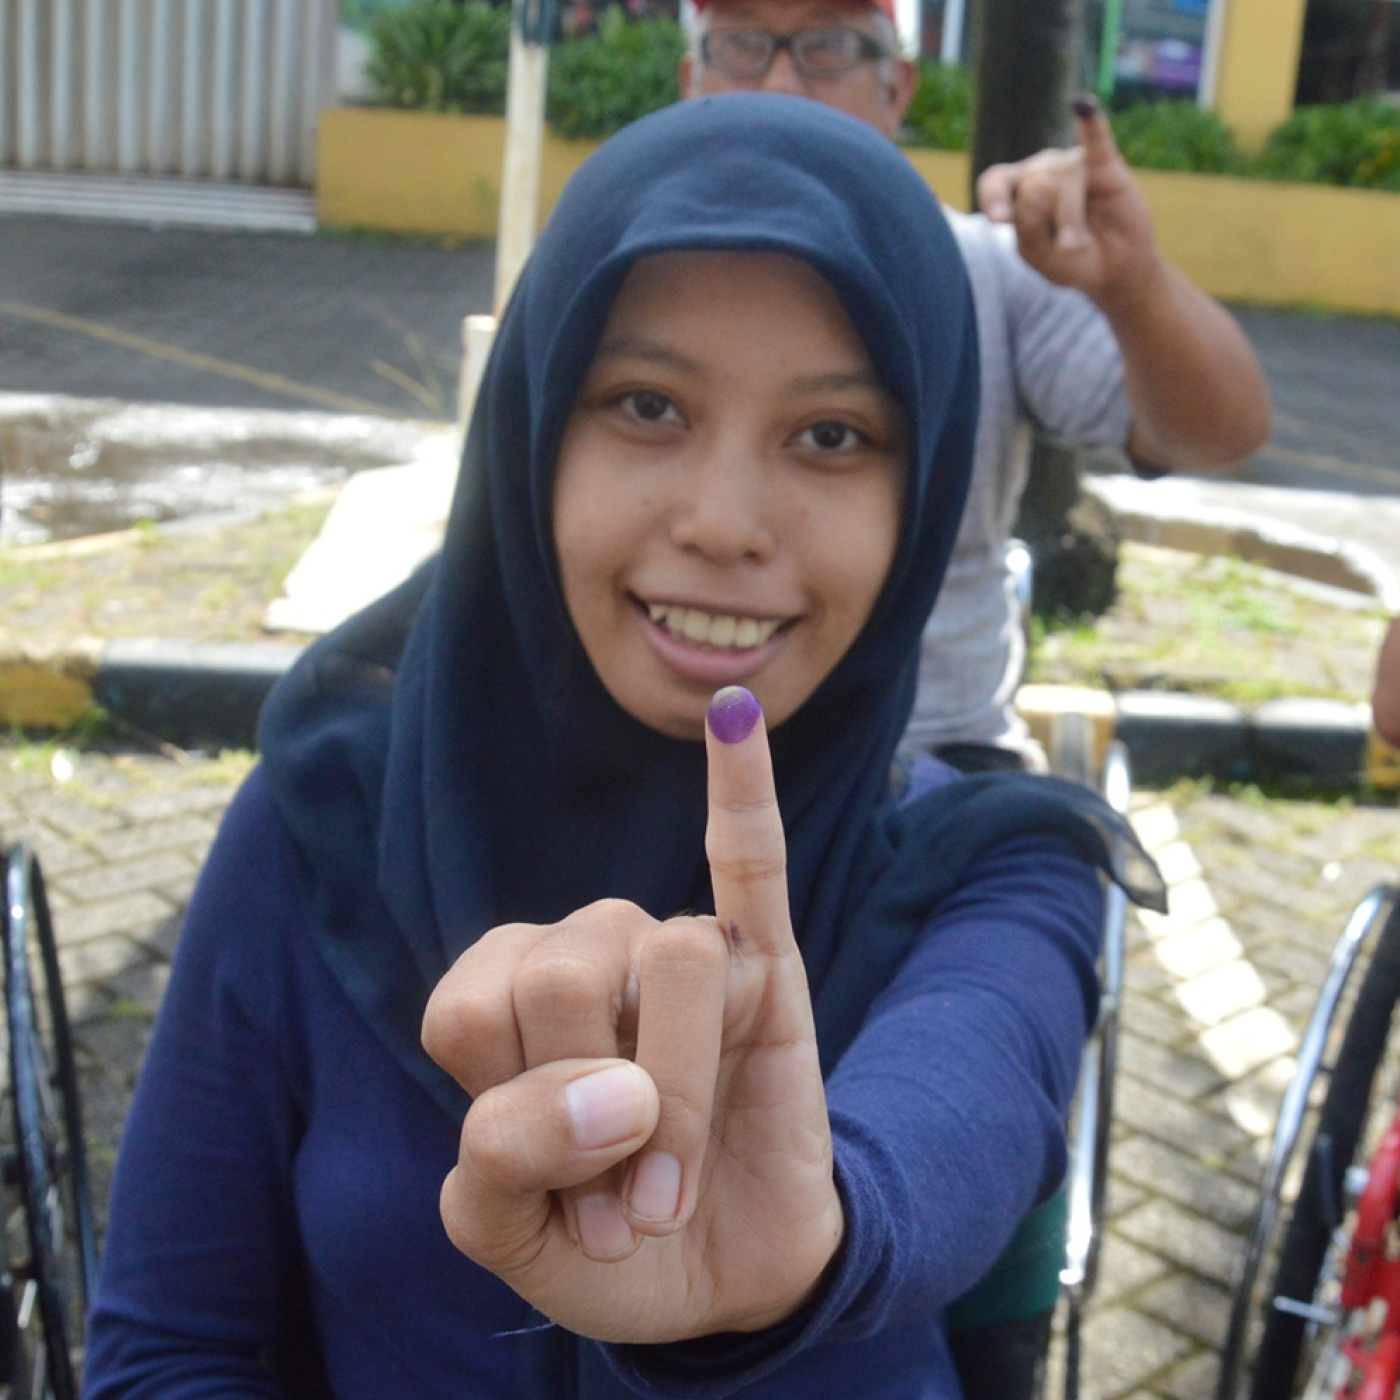 Indonesians with disabilities exercising their voting rights and showing inked fingers